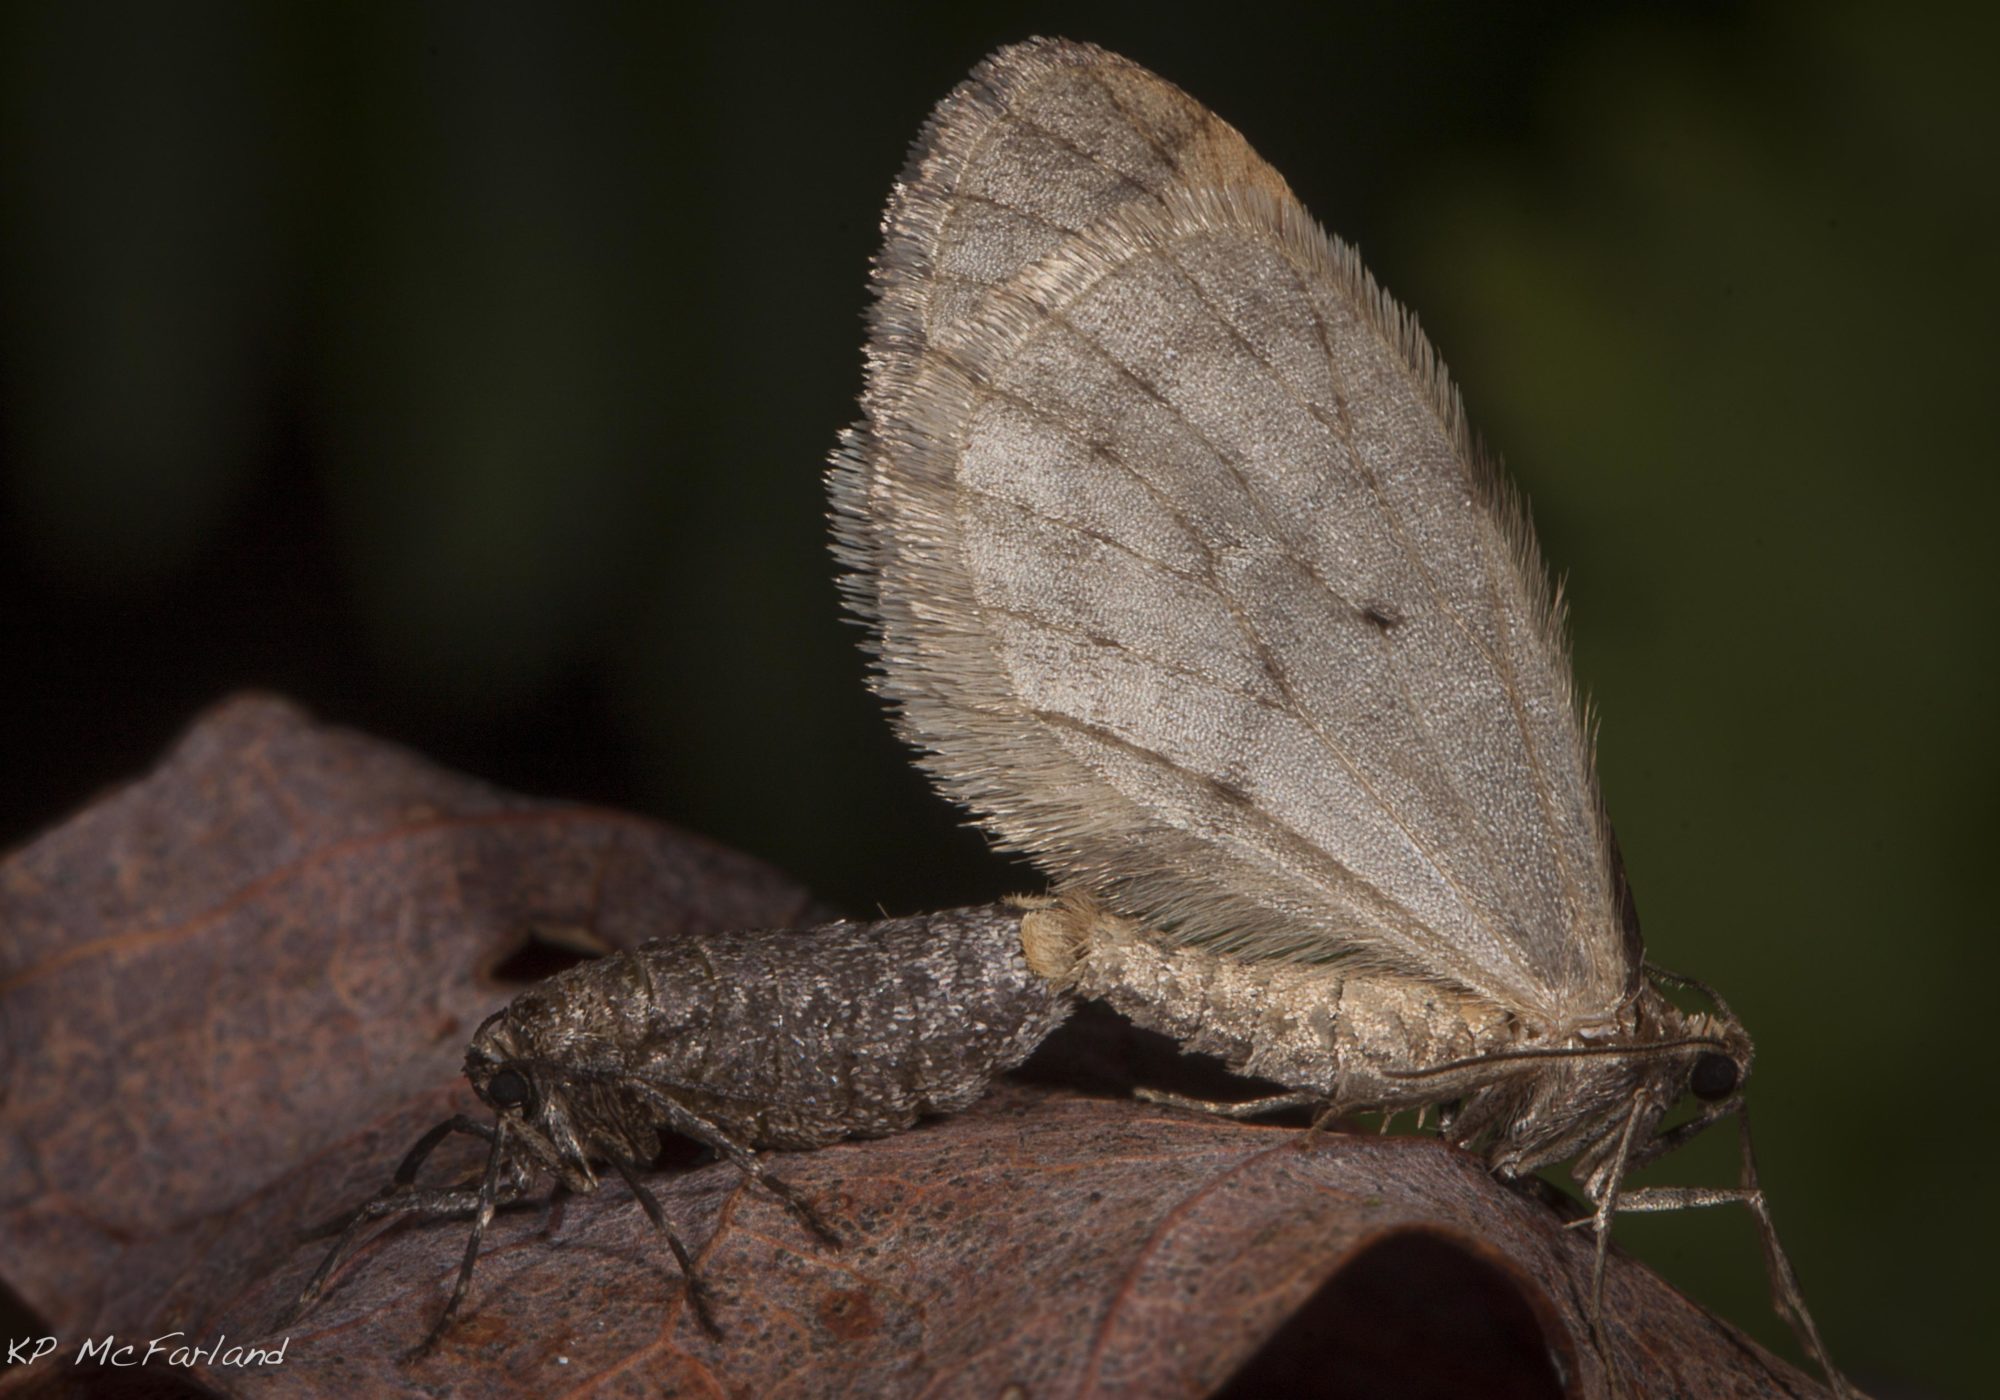 Bruce Spanworm (Operophtera bruceata) is one of the inchworms, a member of the large moth family called Geometridae (which means “earth-measuring”). © K.P. McFarland